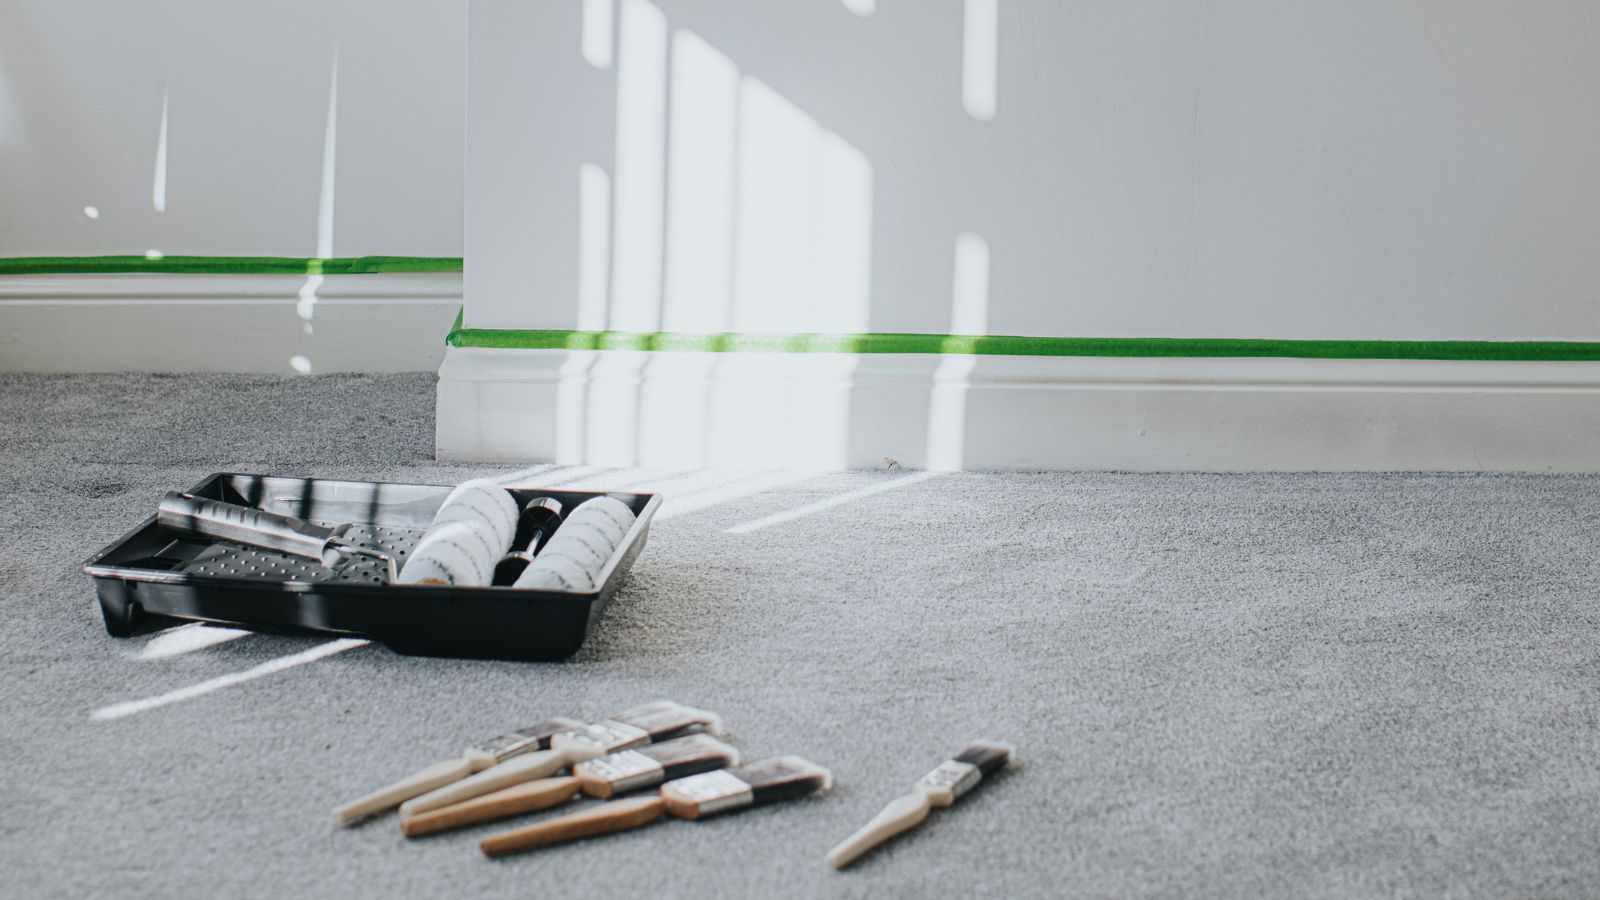 How to paint trims with carpet – 5 professional decorator tips to protect your flooring